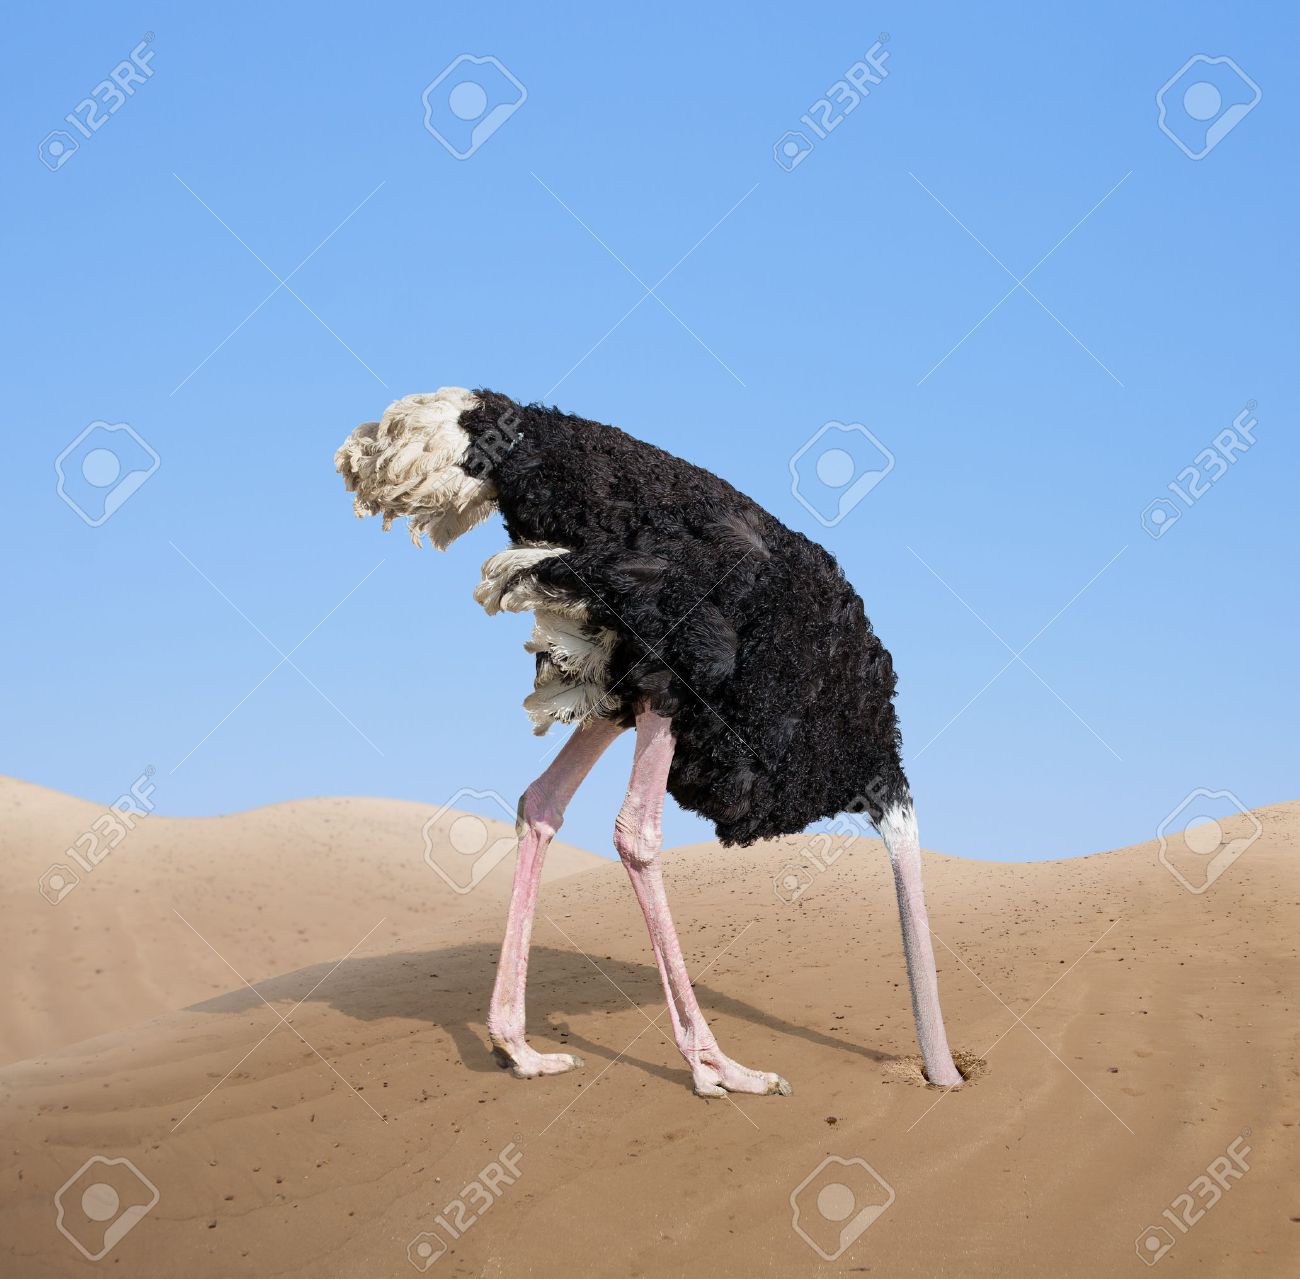 31721808-scared-ostrich-burying-its-head-in-sand.jpg